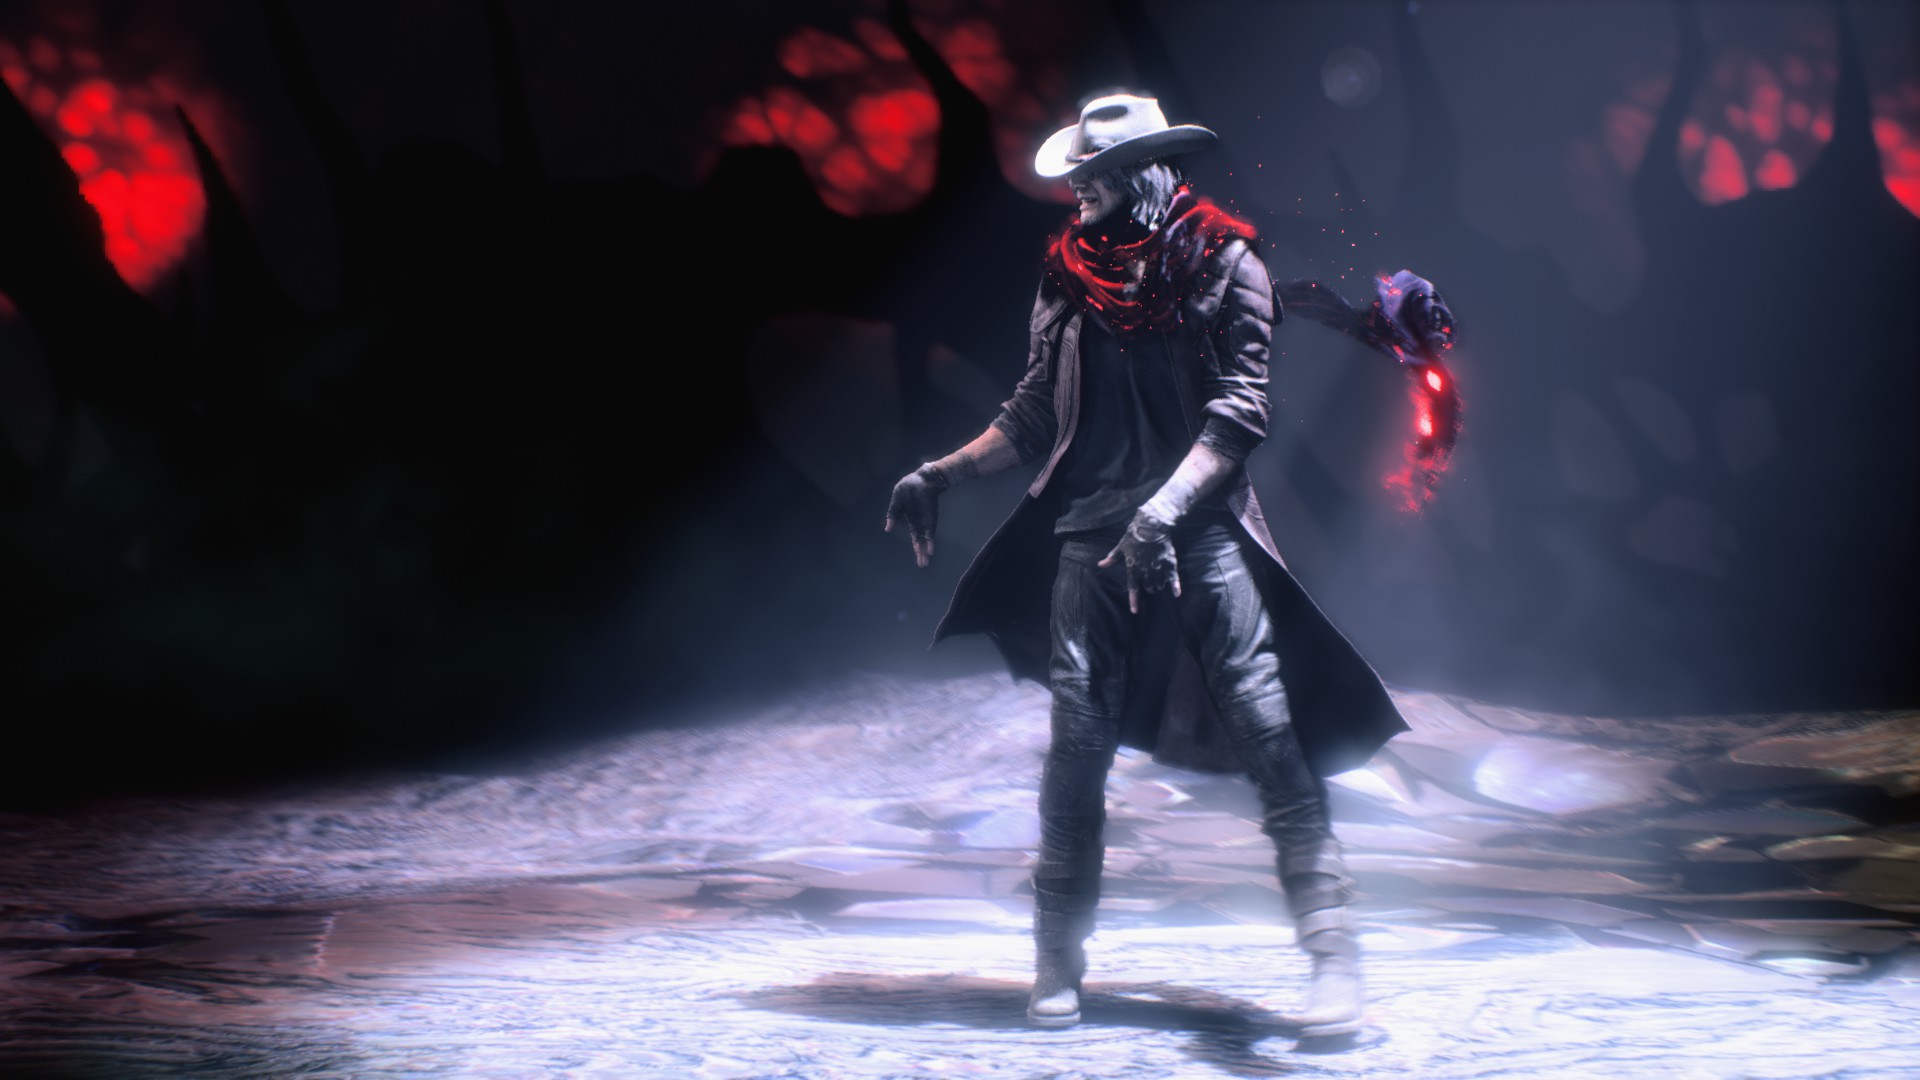 Devil May Cry (Reboot) / Dante - Mission 2 (Son of Sparda) 